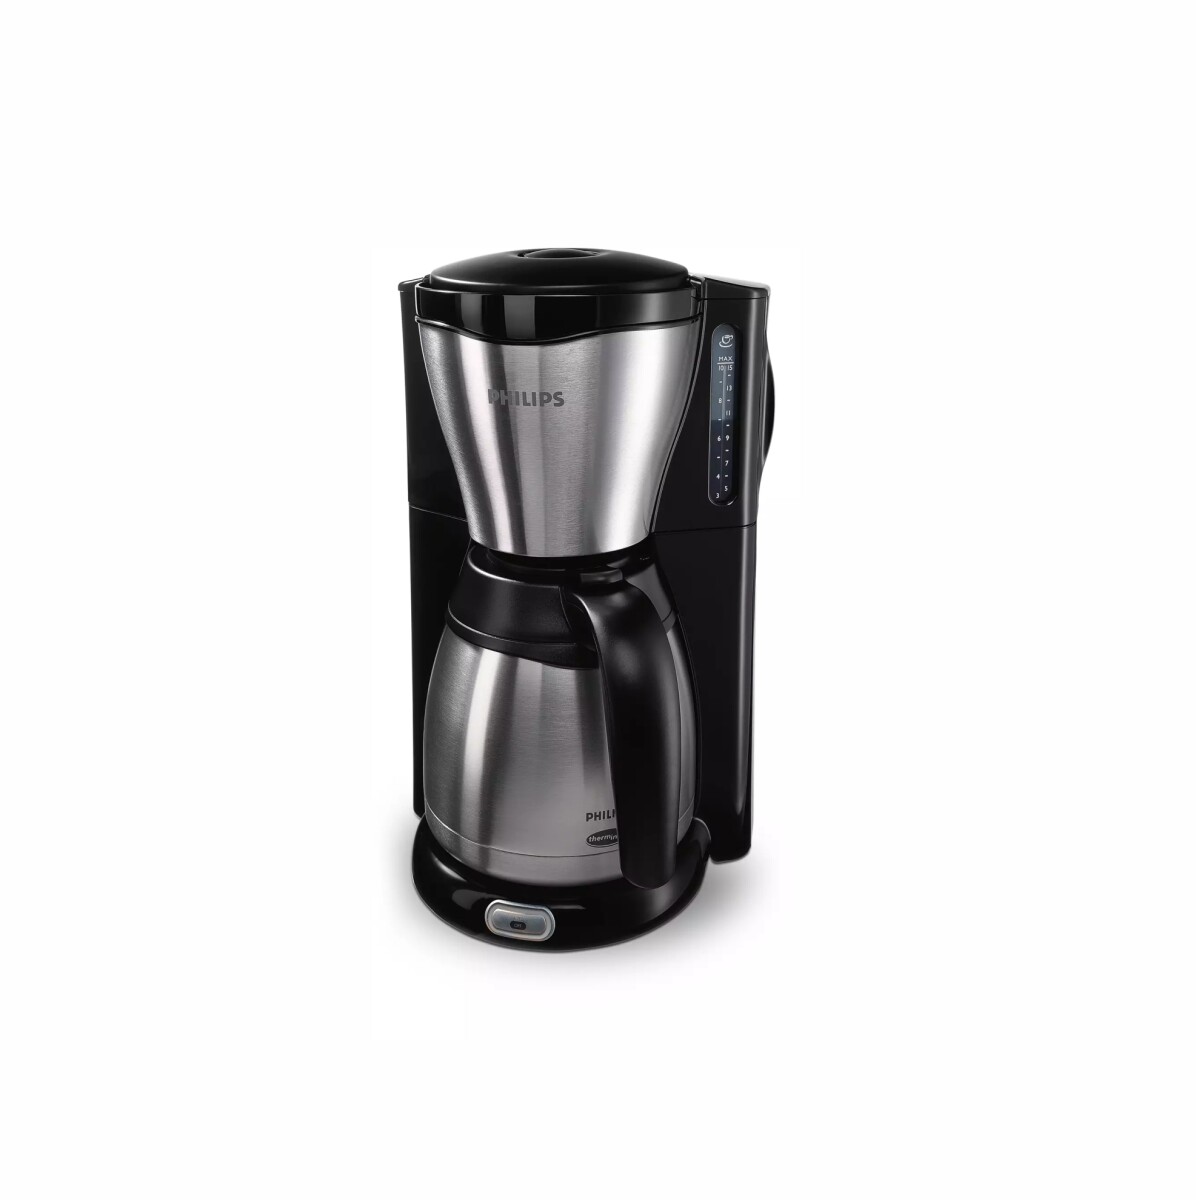 CAFETERA PHILIPS MOD. HD7546/20 